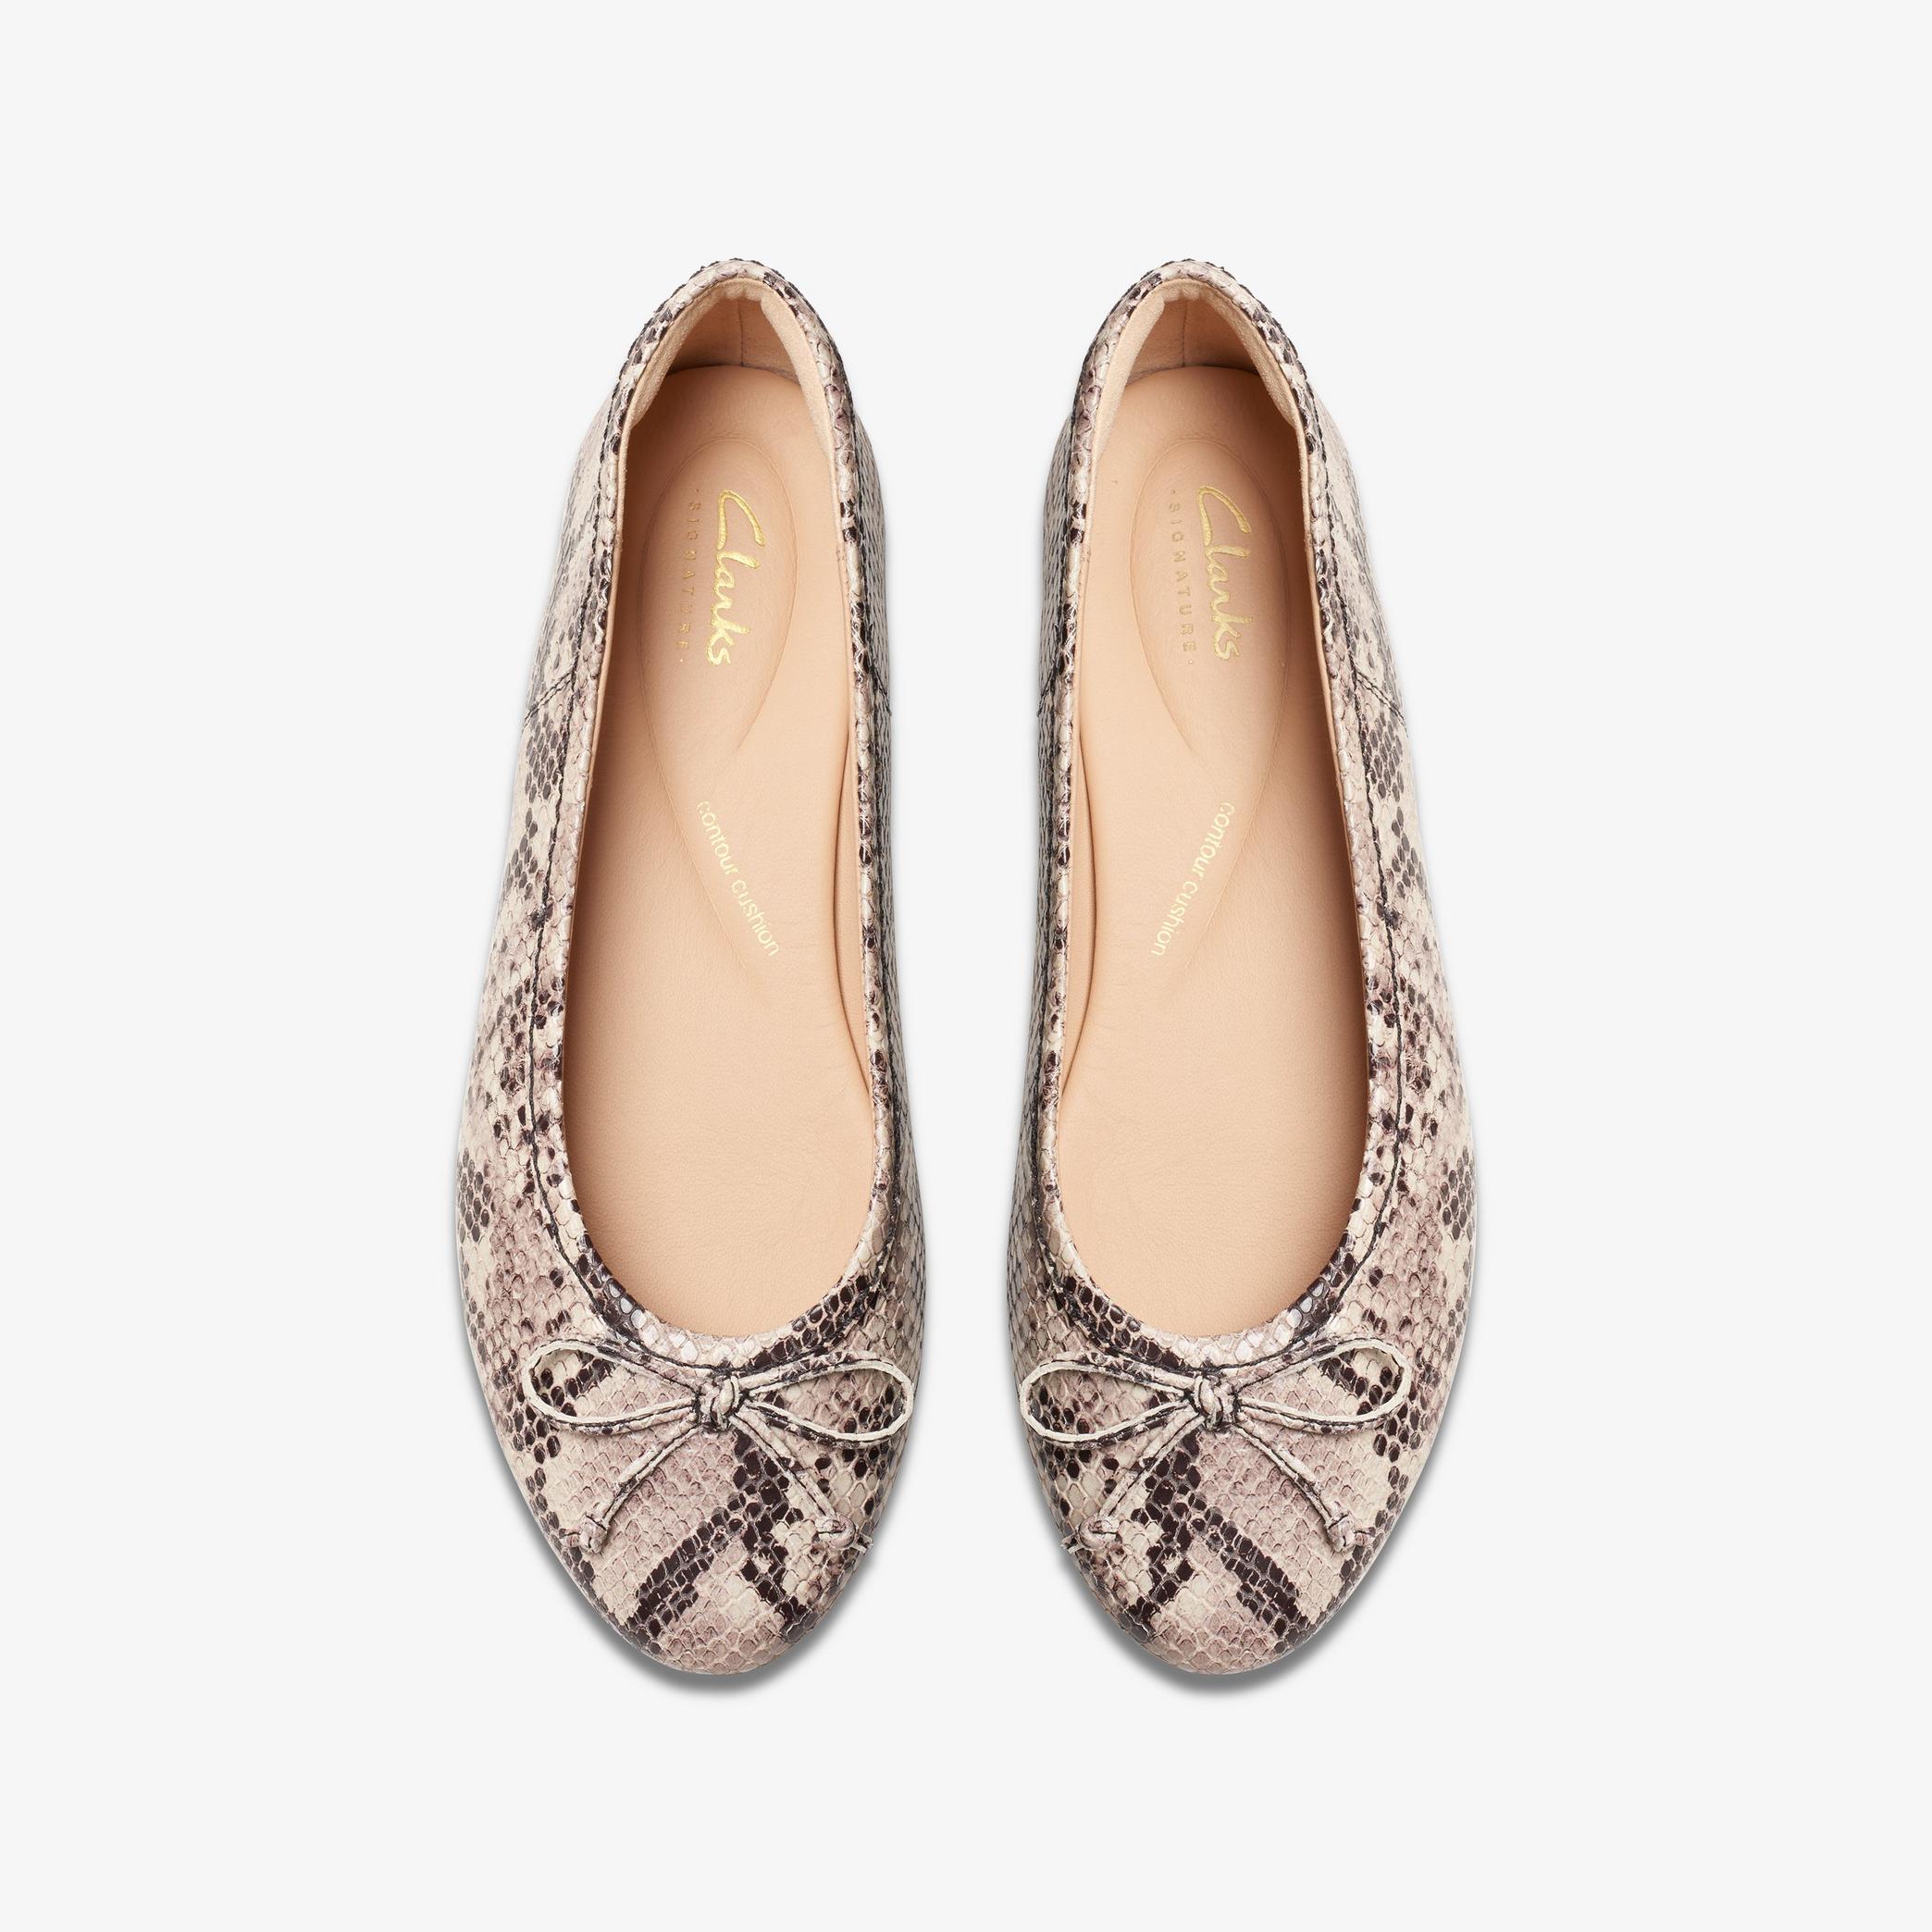 Fawna Lily Snake Print Ballerina, view 6 of 7